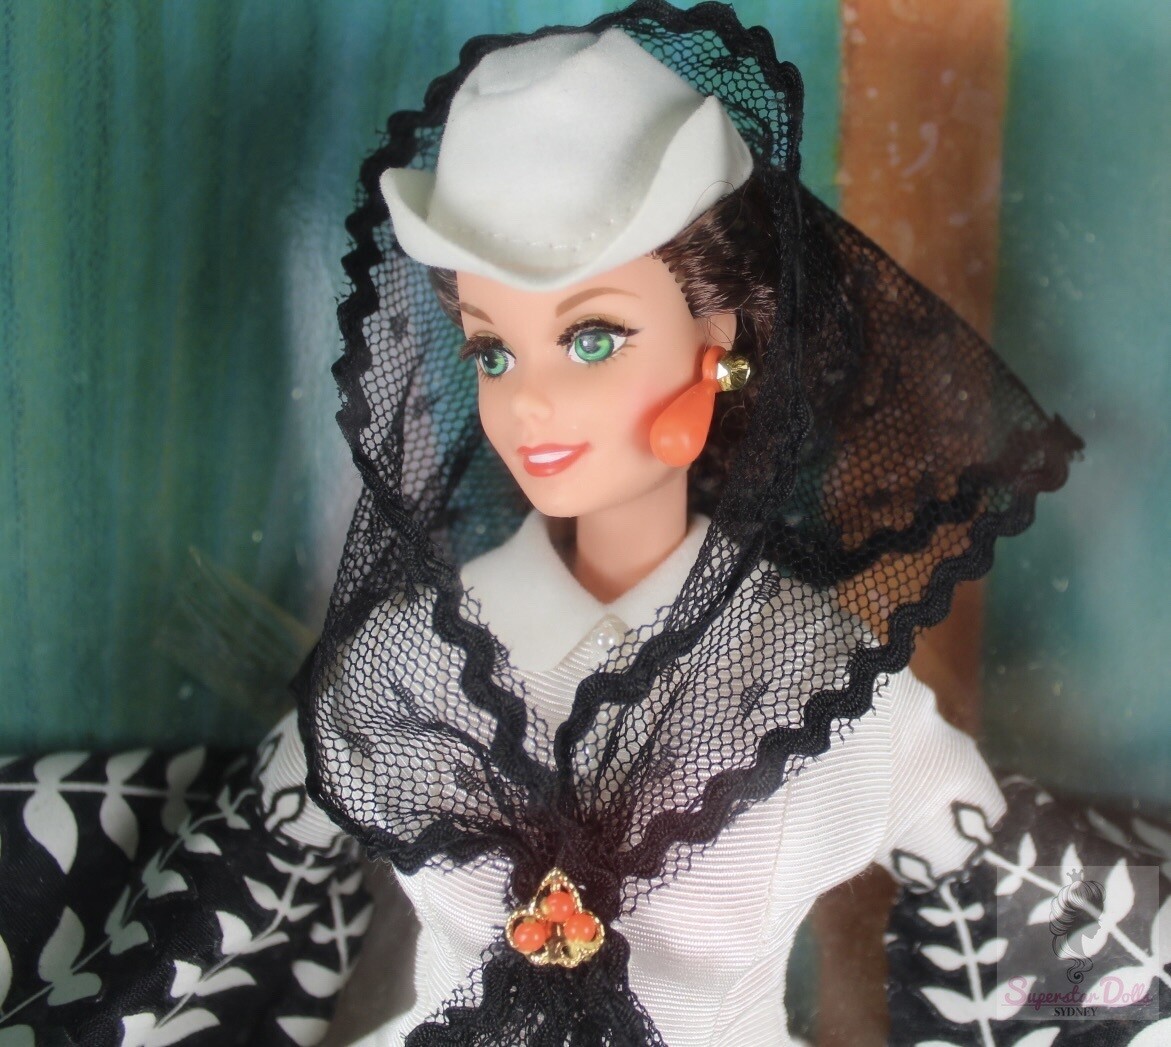 1994 Timeless Treasures: Barbie as Scarlett O'Hara From Gone With The Wind Doll